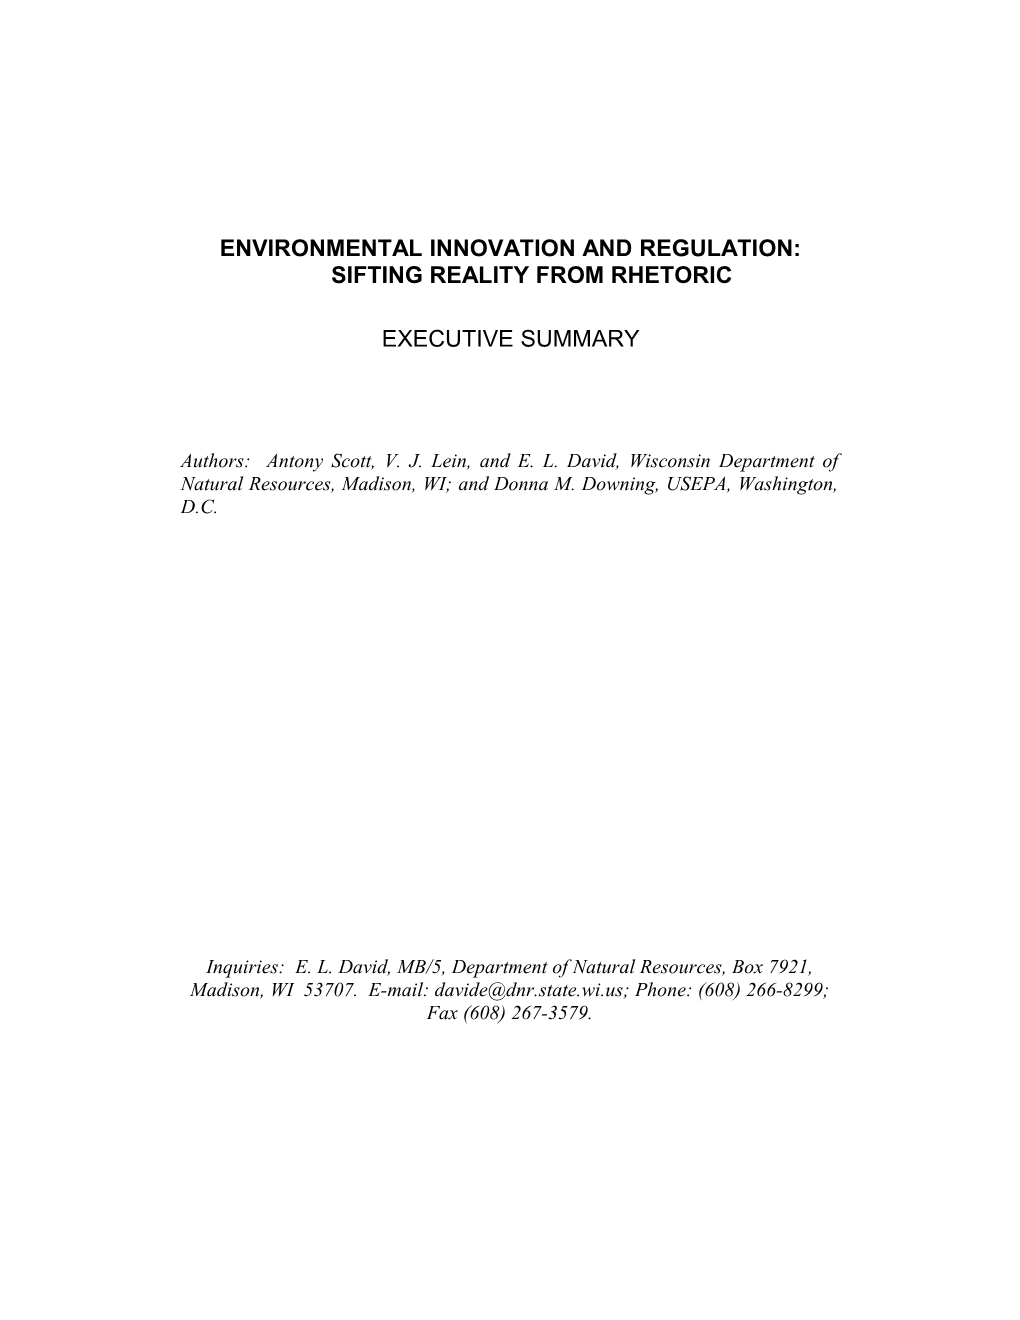 Environmental Innovation and Regulation: Sifting Reality from Rhetoric